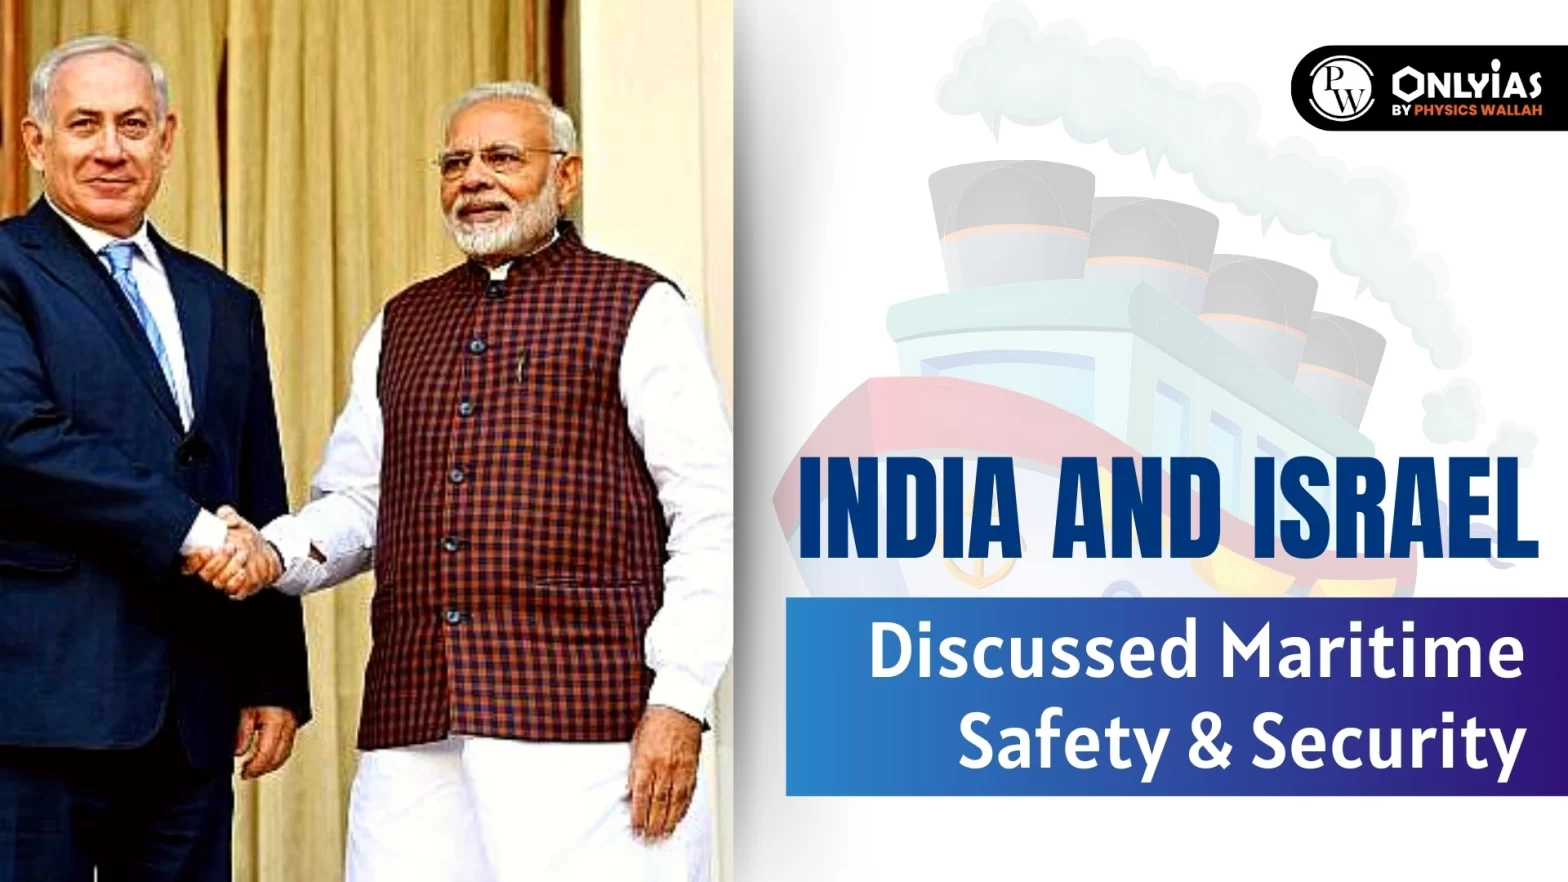 India And Israel Discussed Maritime Safety & Security